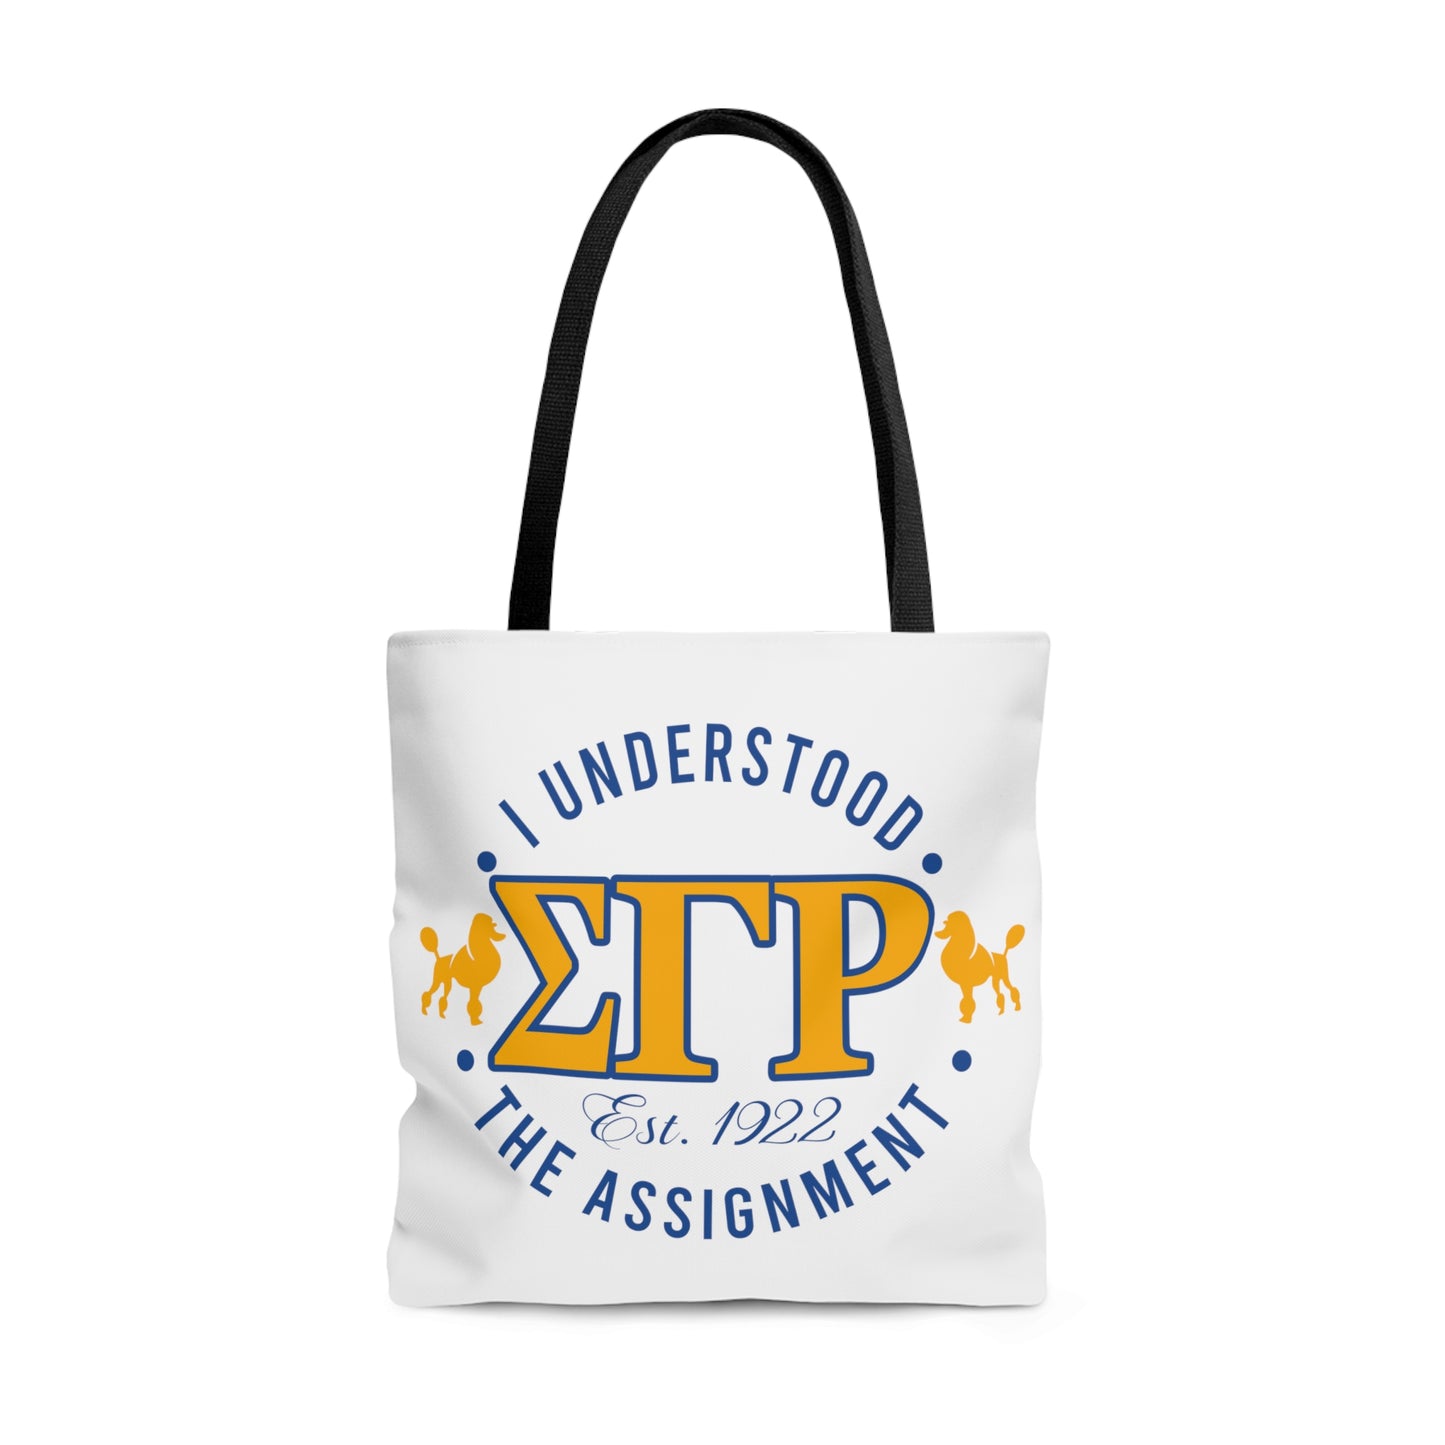 SGRho Understood the Assignment Tote Bag